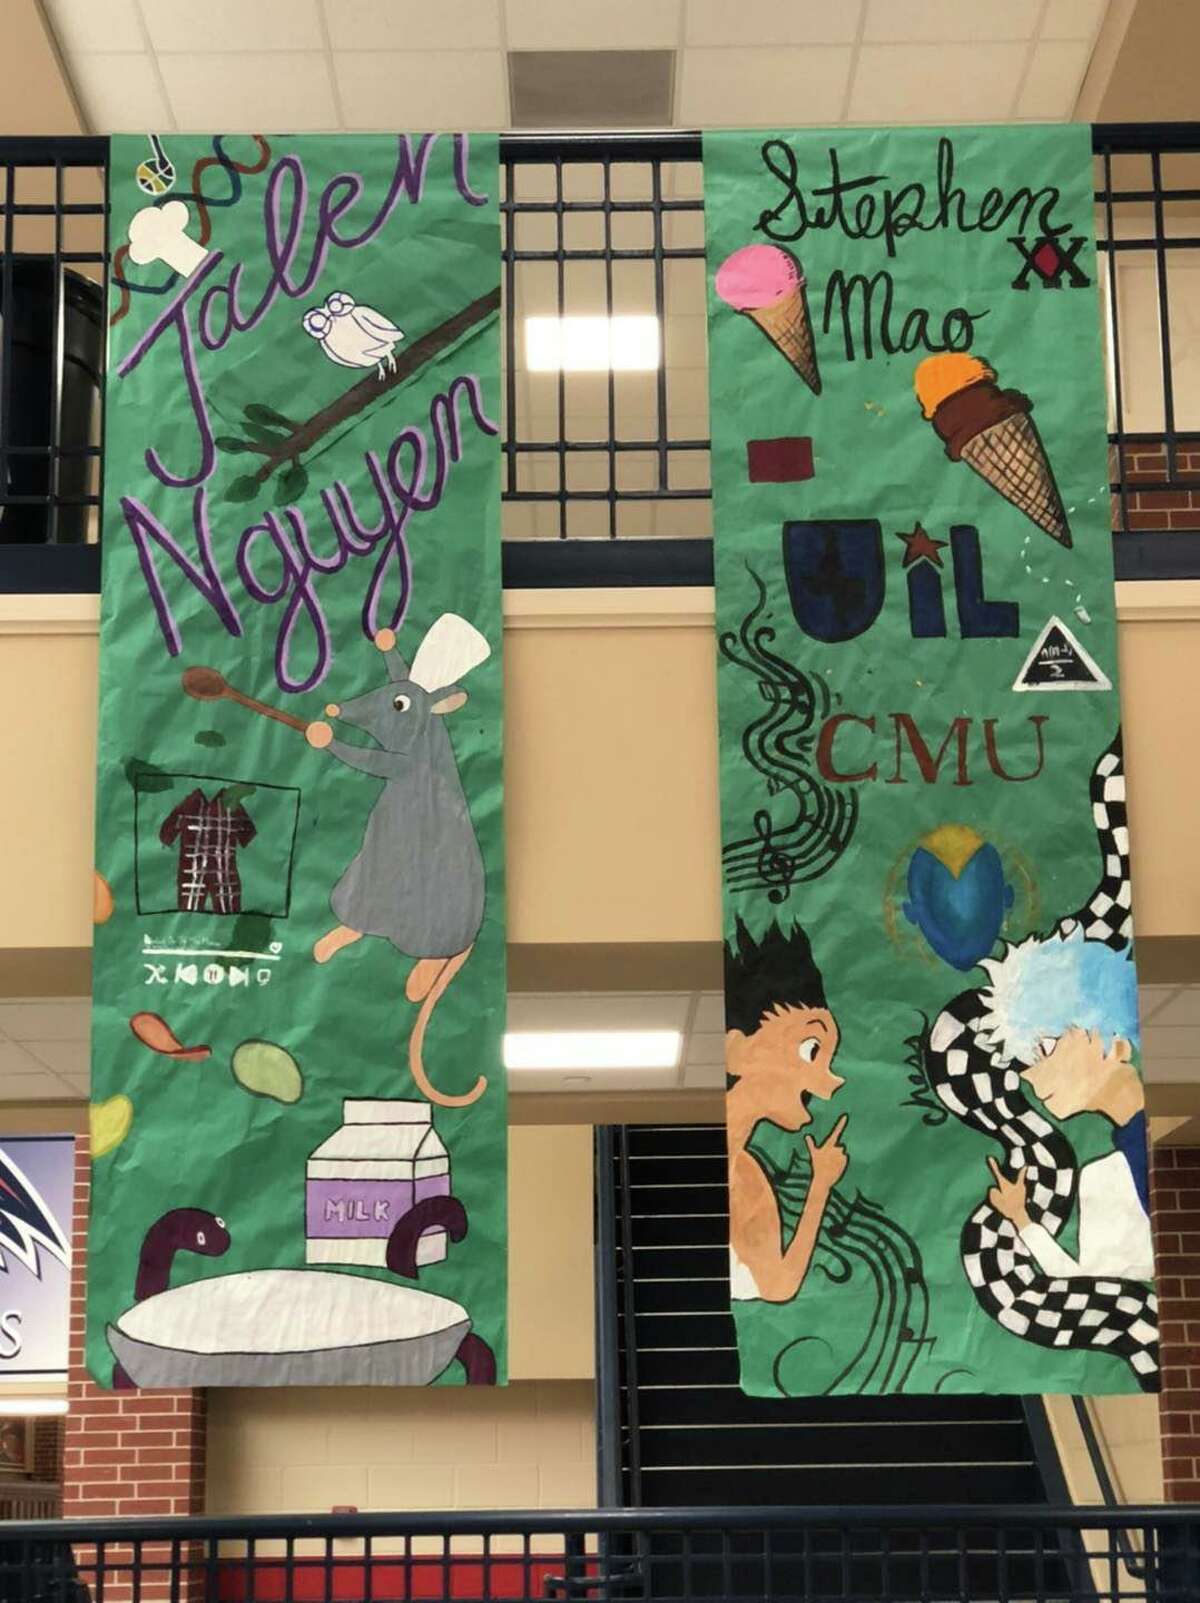 Banners decorating the entrance hallway at Dawson High School were created by members of the school's student council to honor each of the Top 20-ranked graduating seniors.